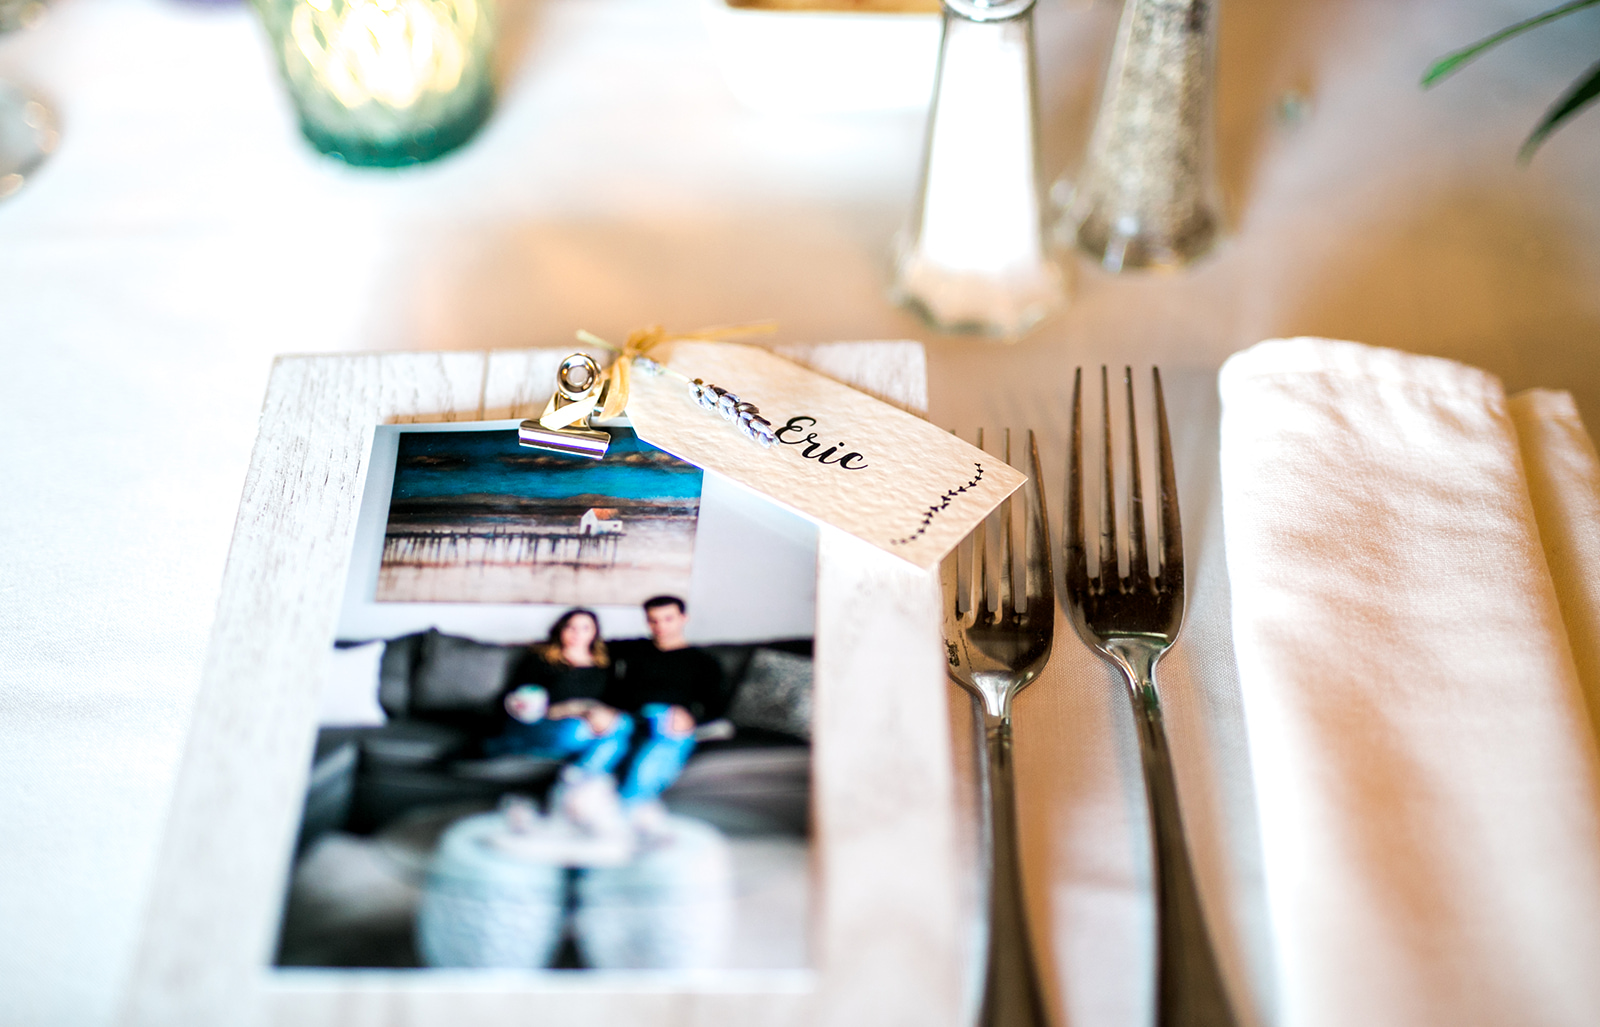 Wedding Favor ideas - Personalized pictures of the couple with frames and lavender - Pearl Weddings & Events